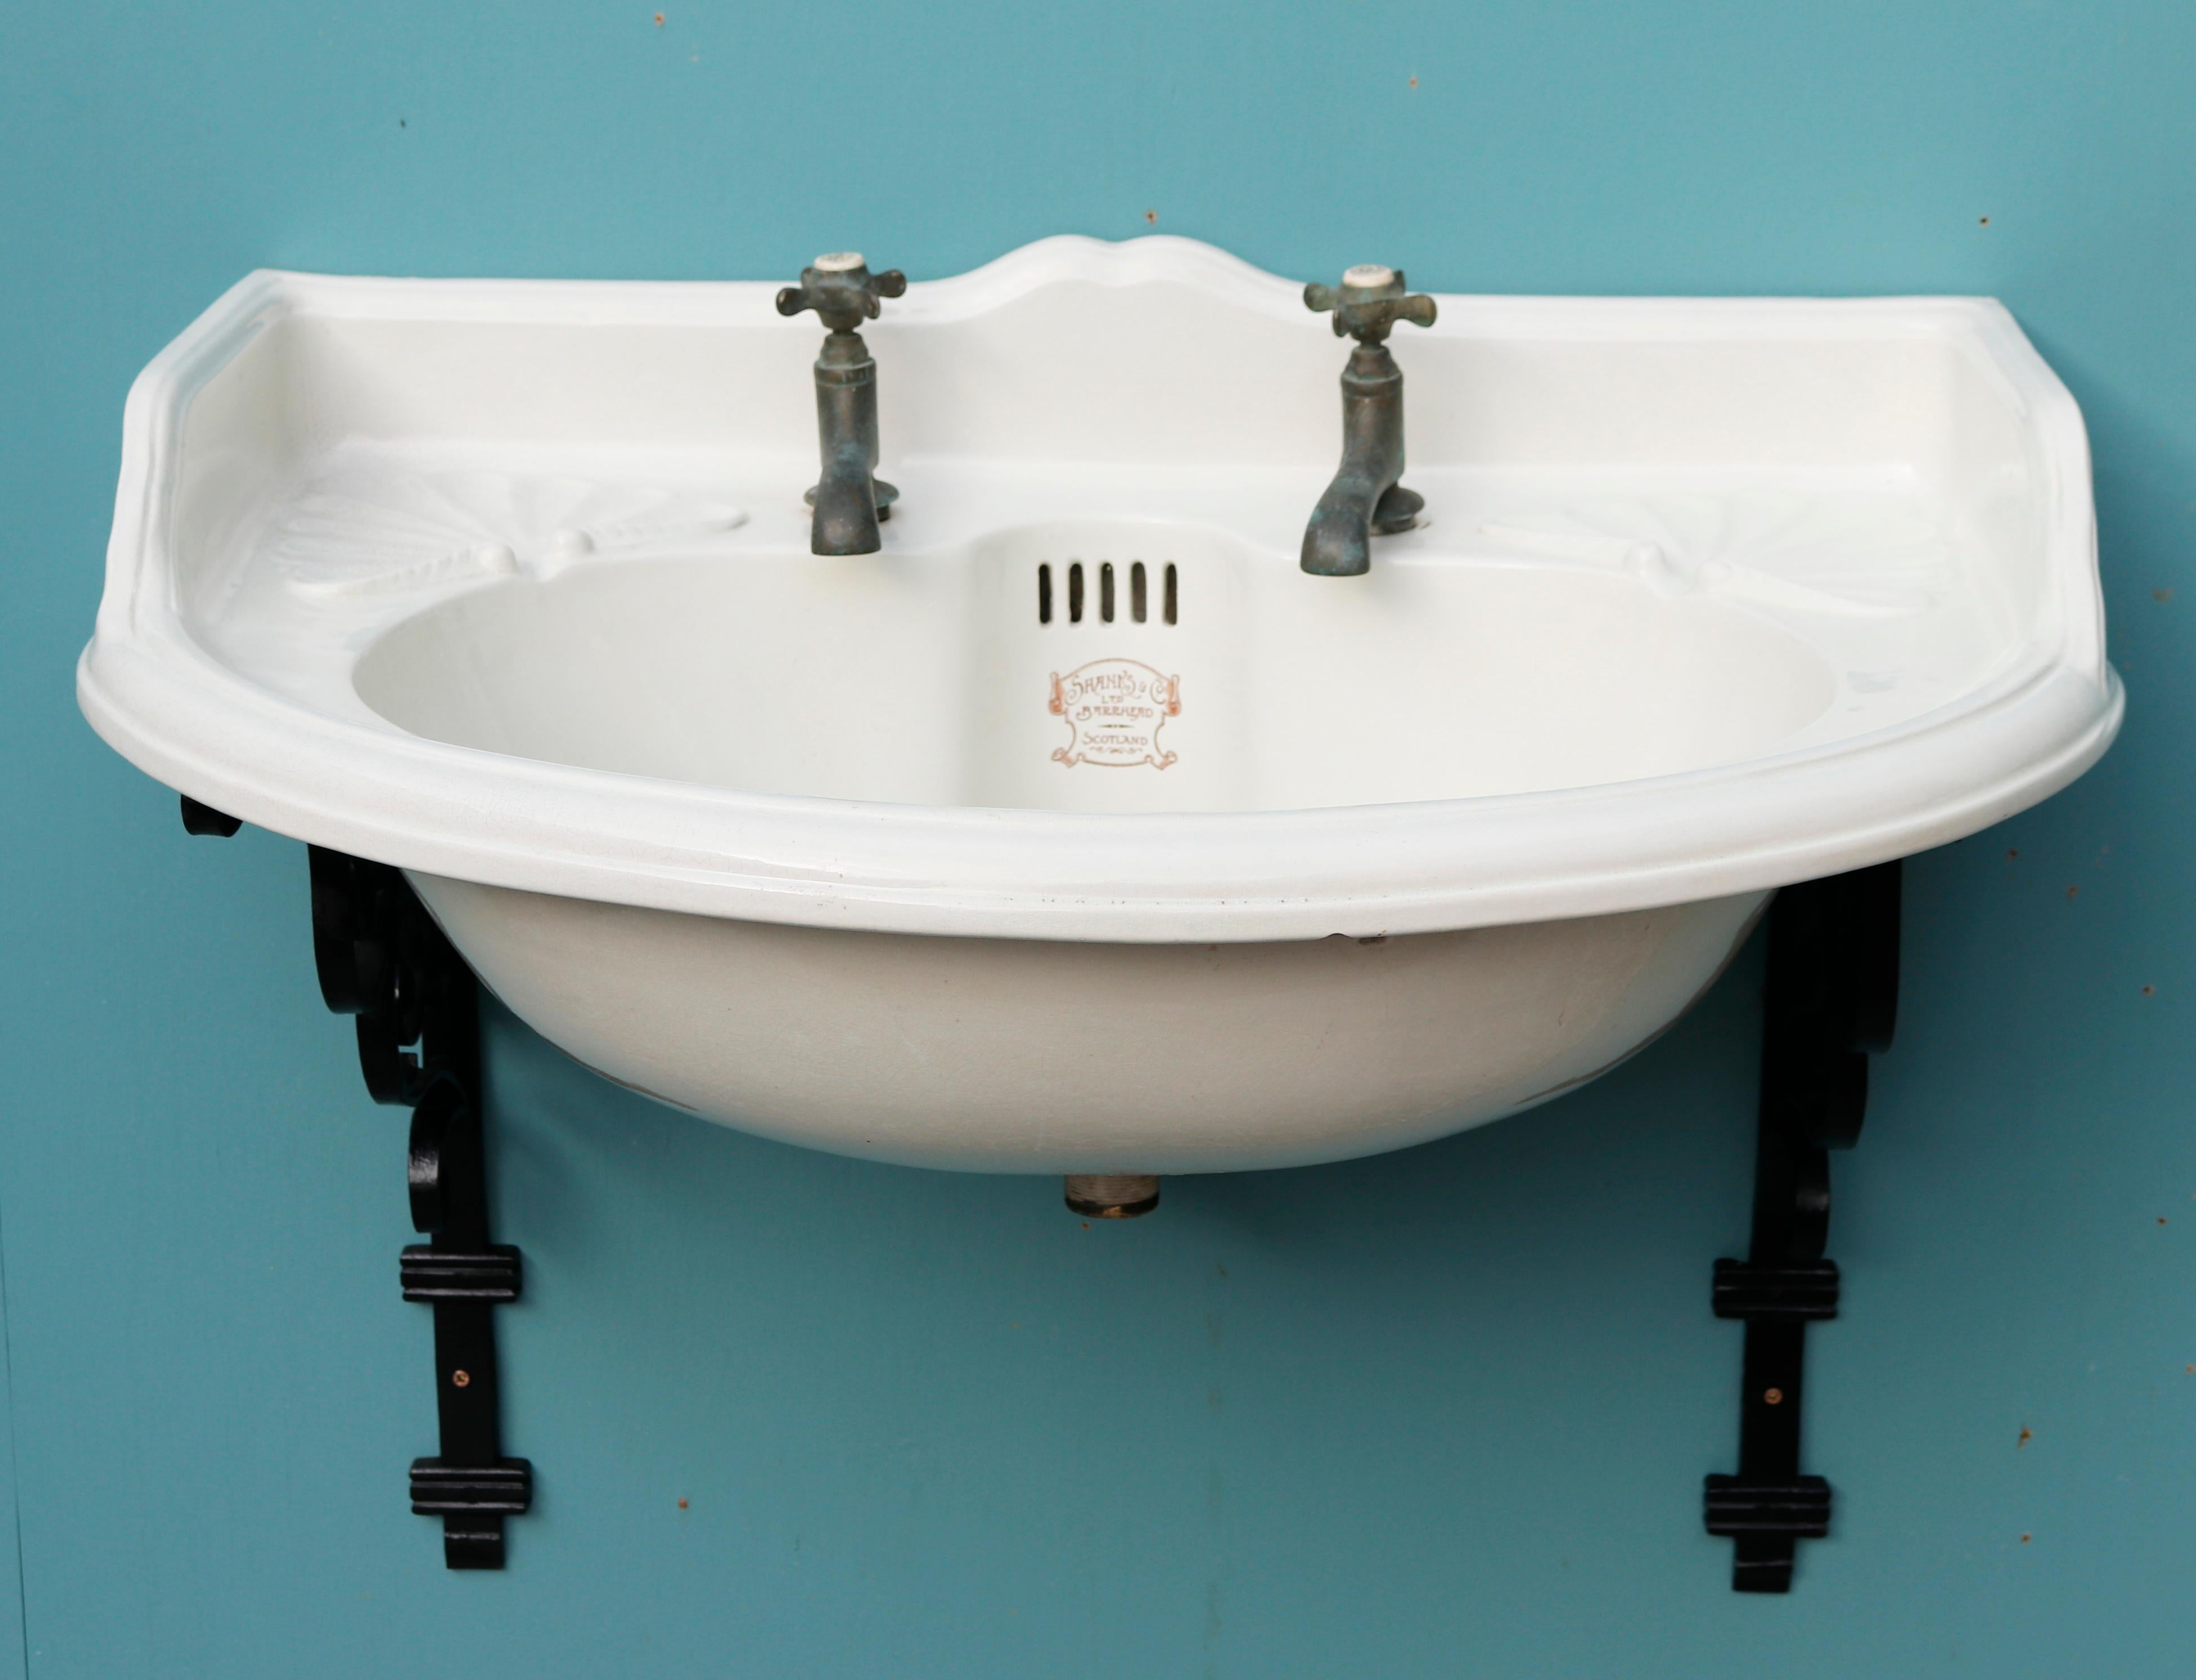 A Shanks bow fronted porcelain sink with a pair of wrought iron wall mounting brackets. A lovely basin, very scare in this size and condition.